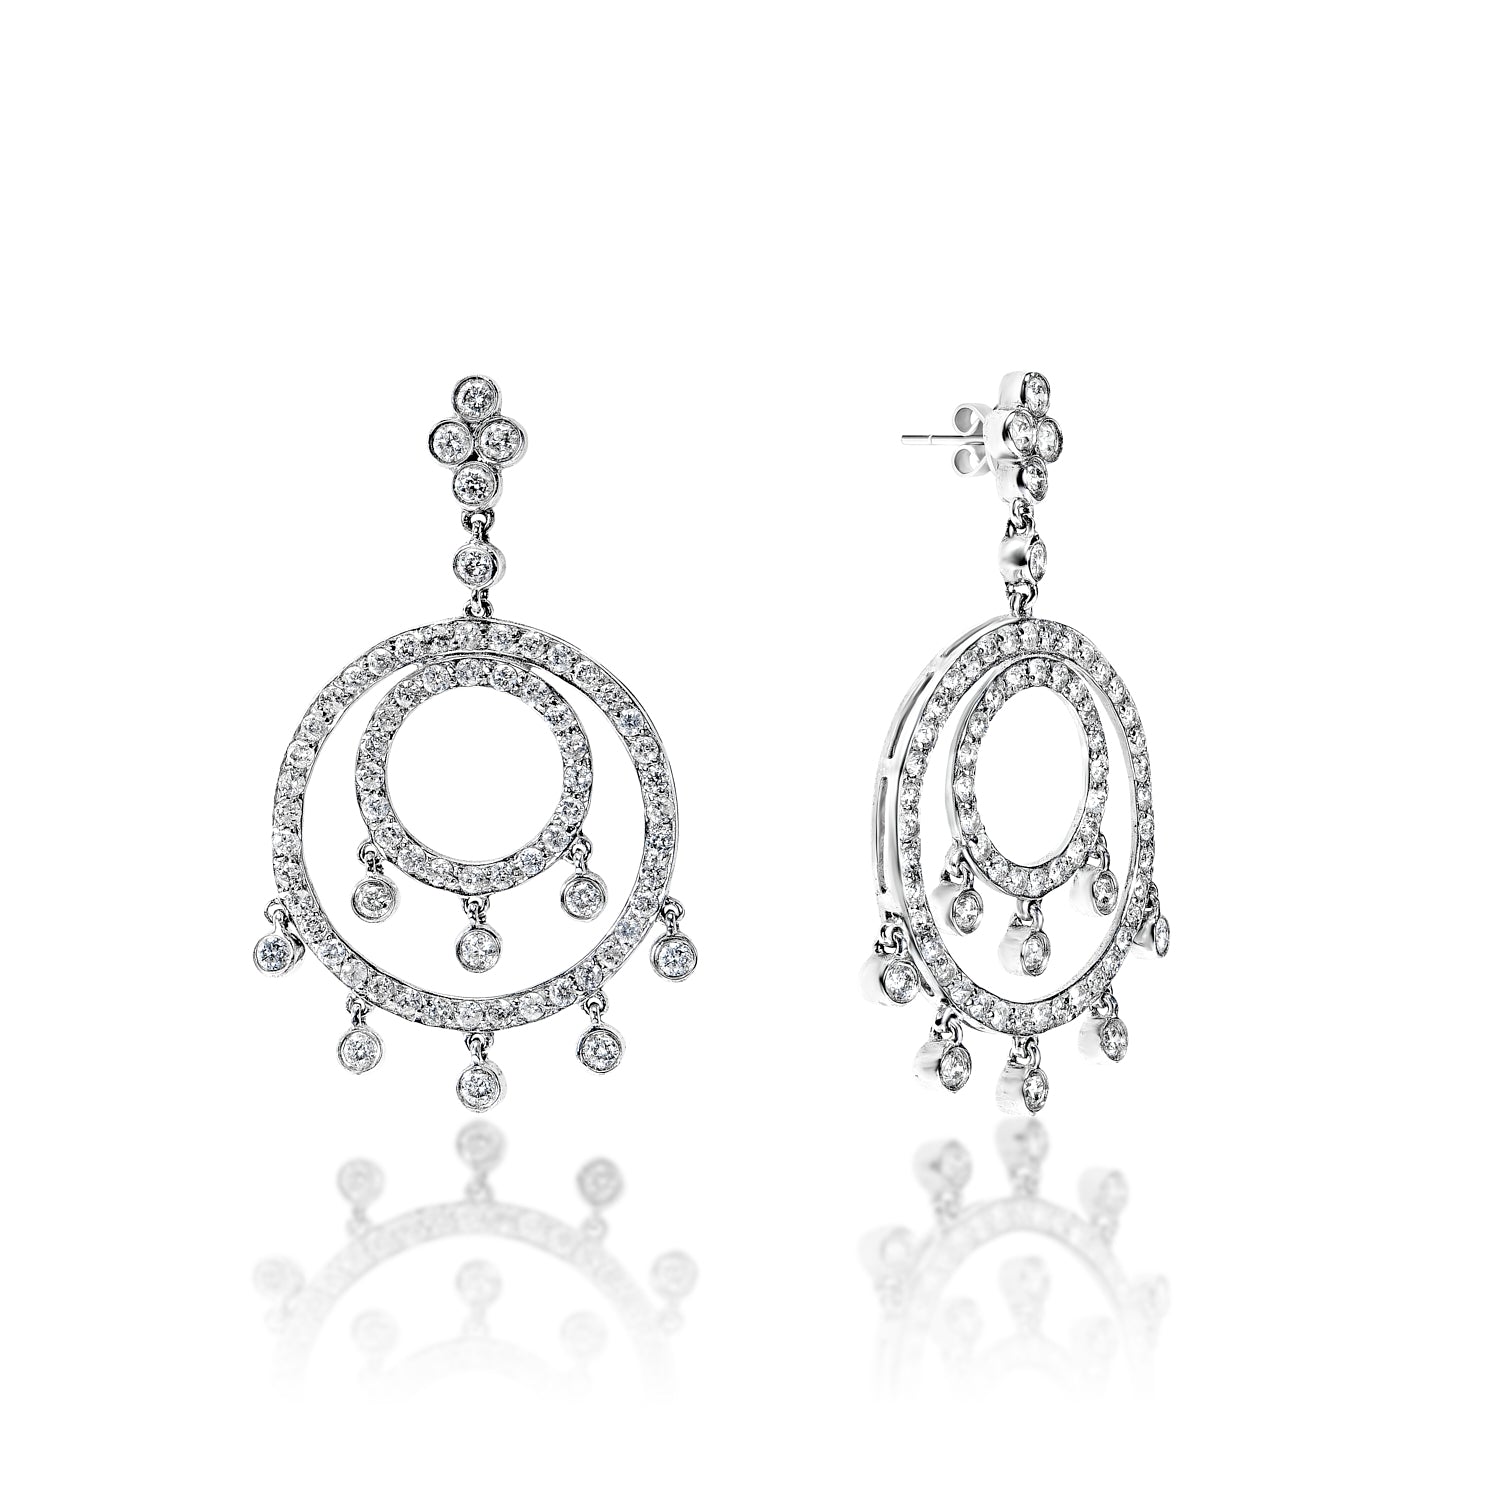 Madilyn 2 Carat Round Brilliant Diamond Hanging Earrings in 14k White Gold Front and Side View